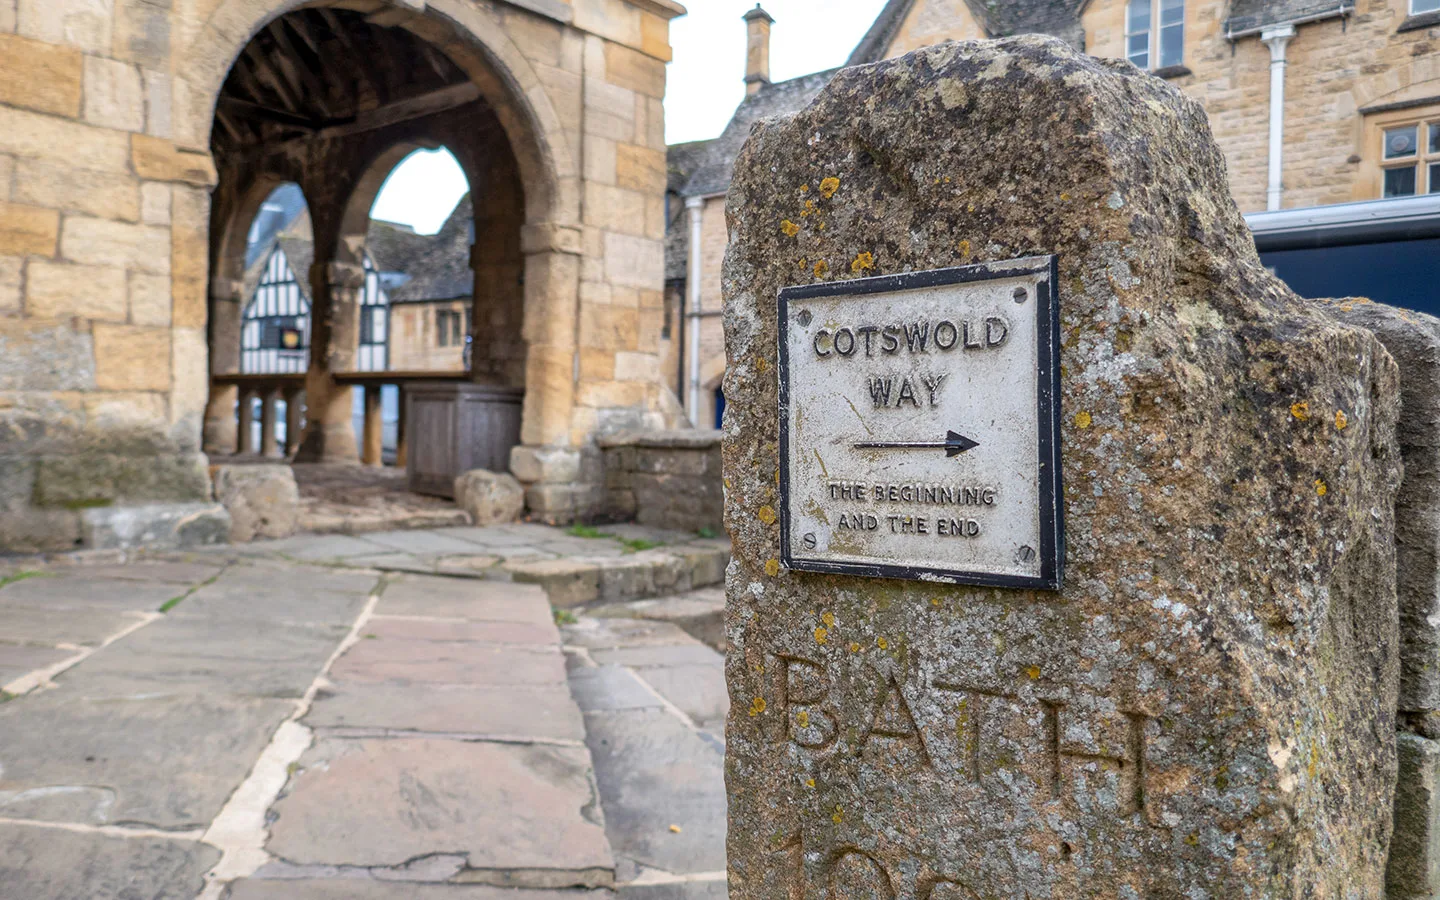 Cotswold Way marker stone in Chipping Campden